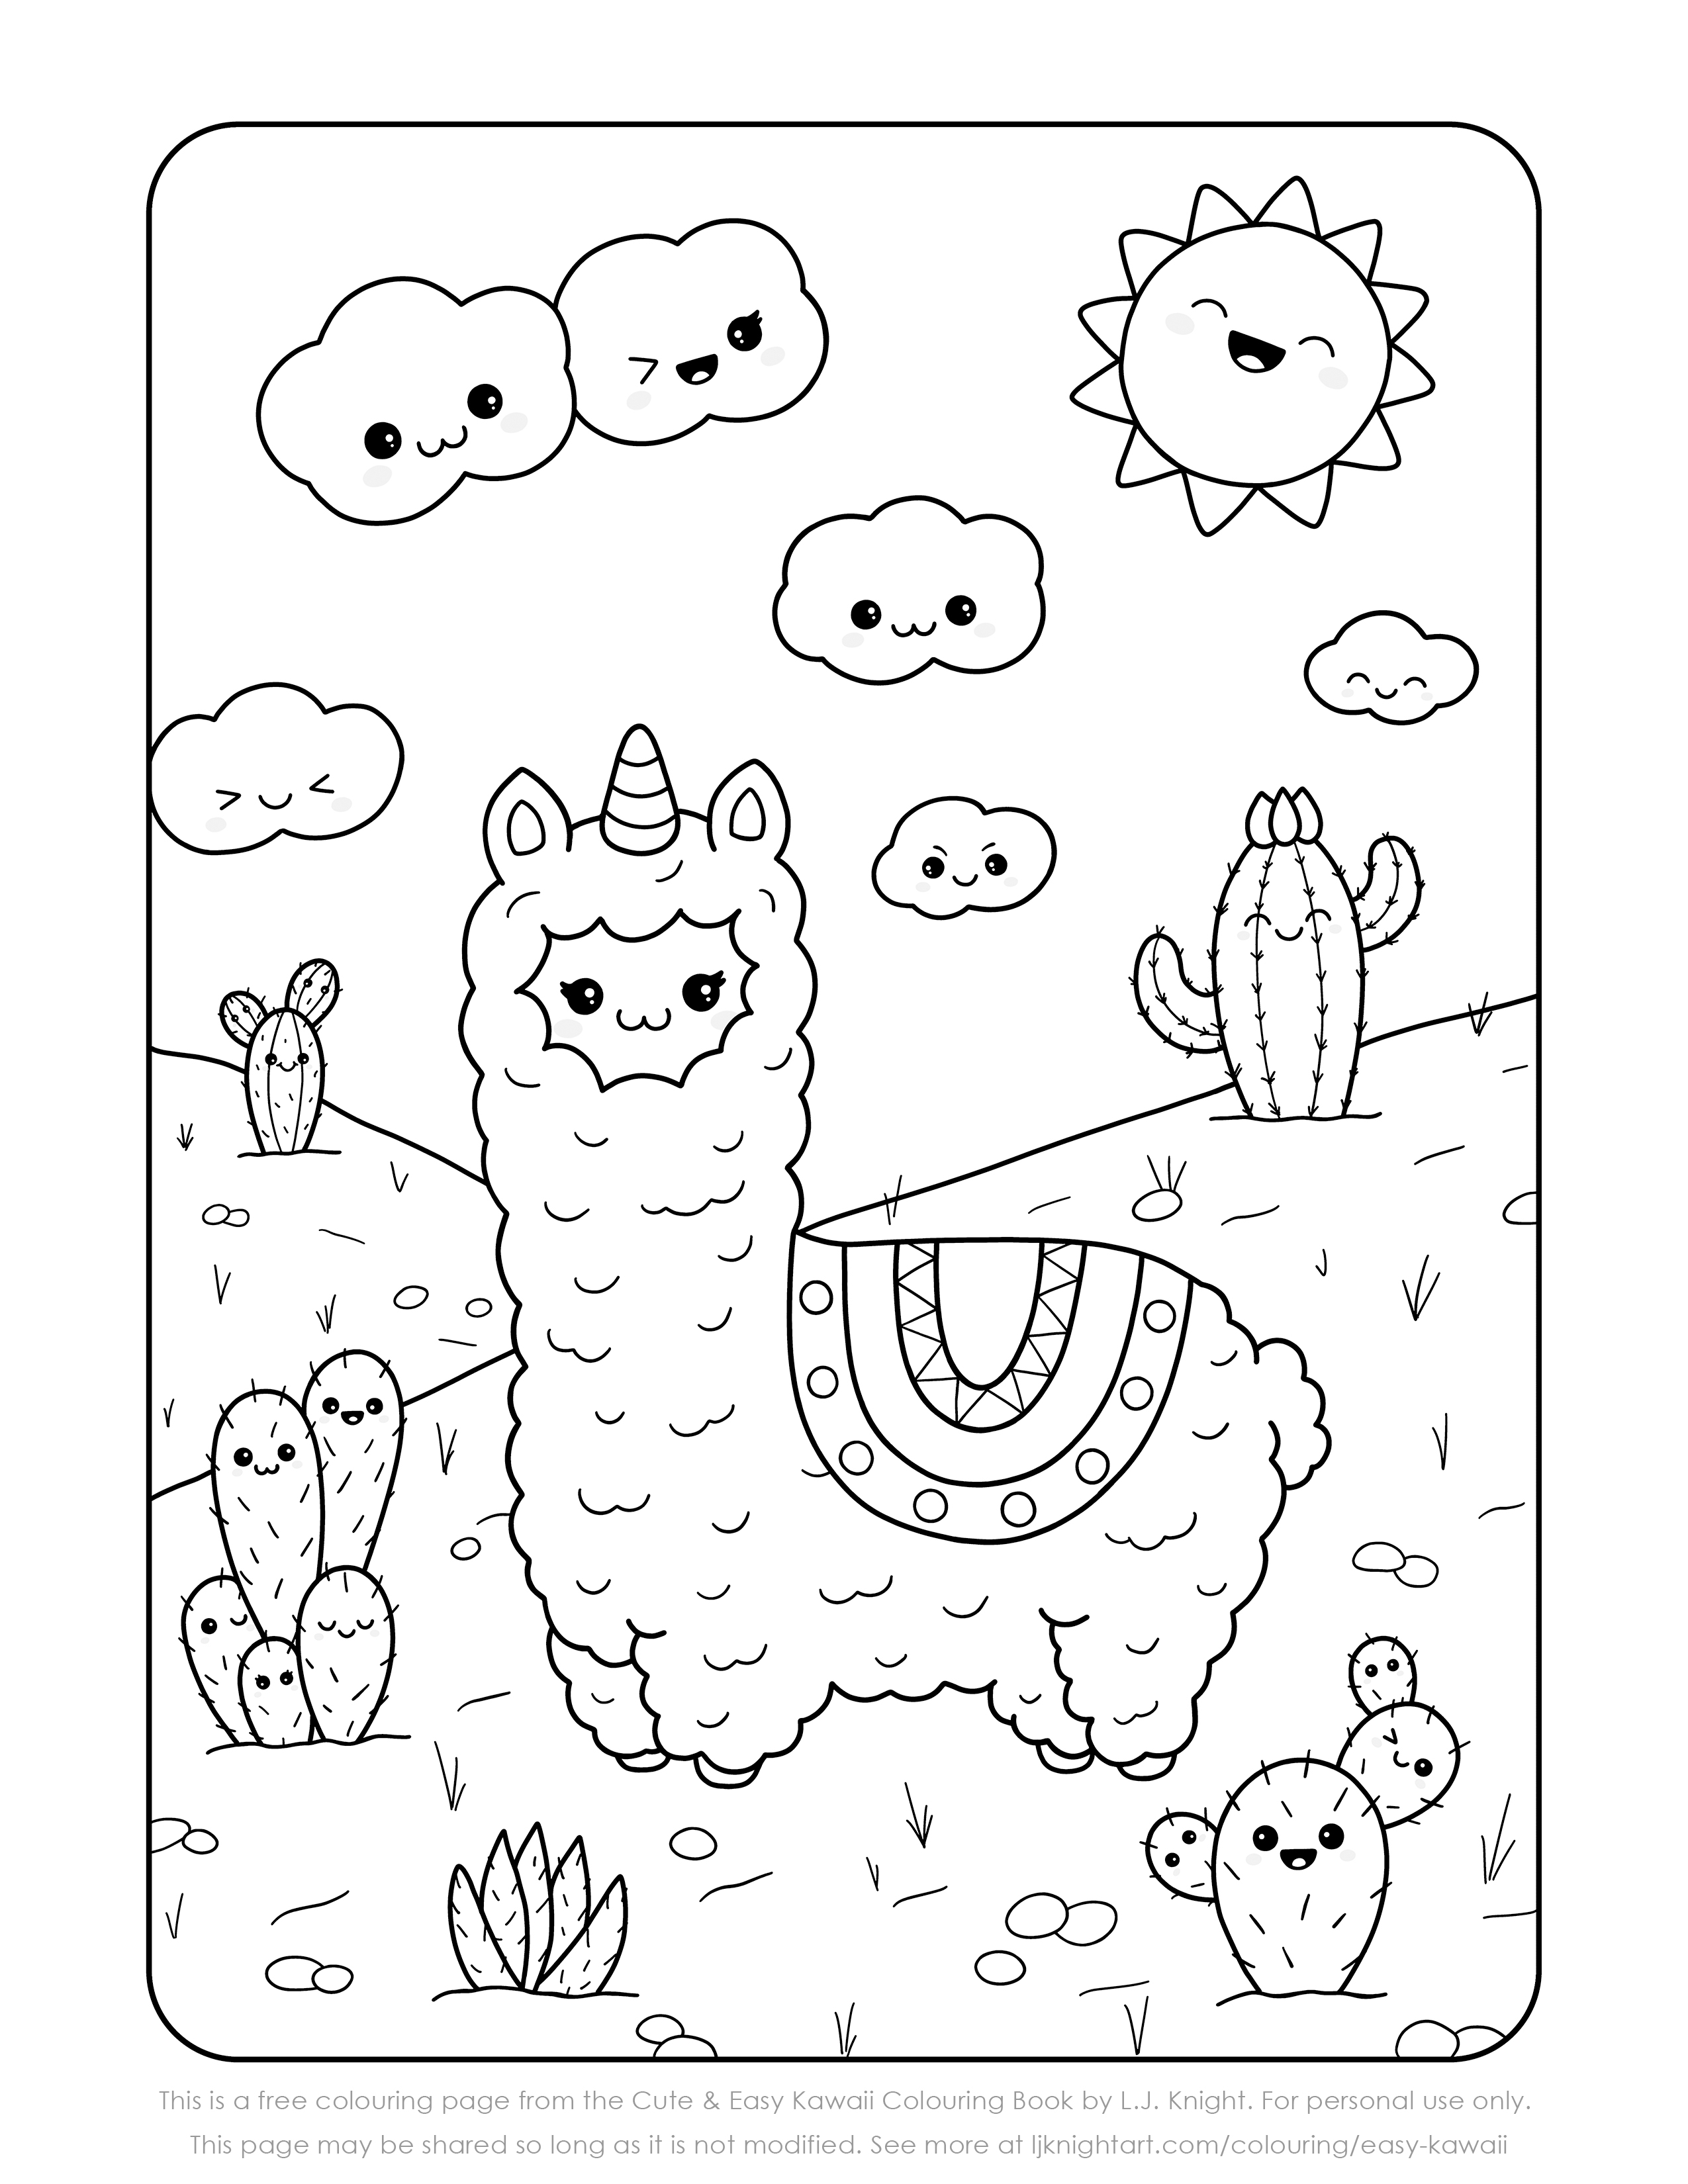 Free kawaii llamacorn printable colouring page, from the Cute & Easy